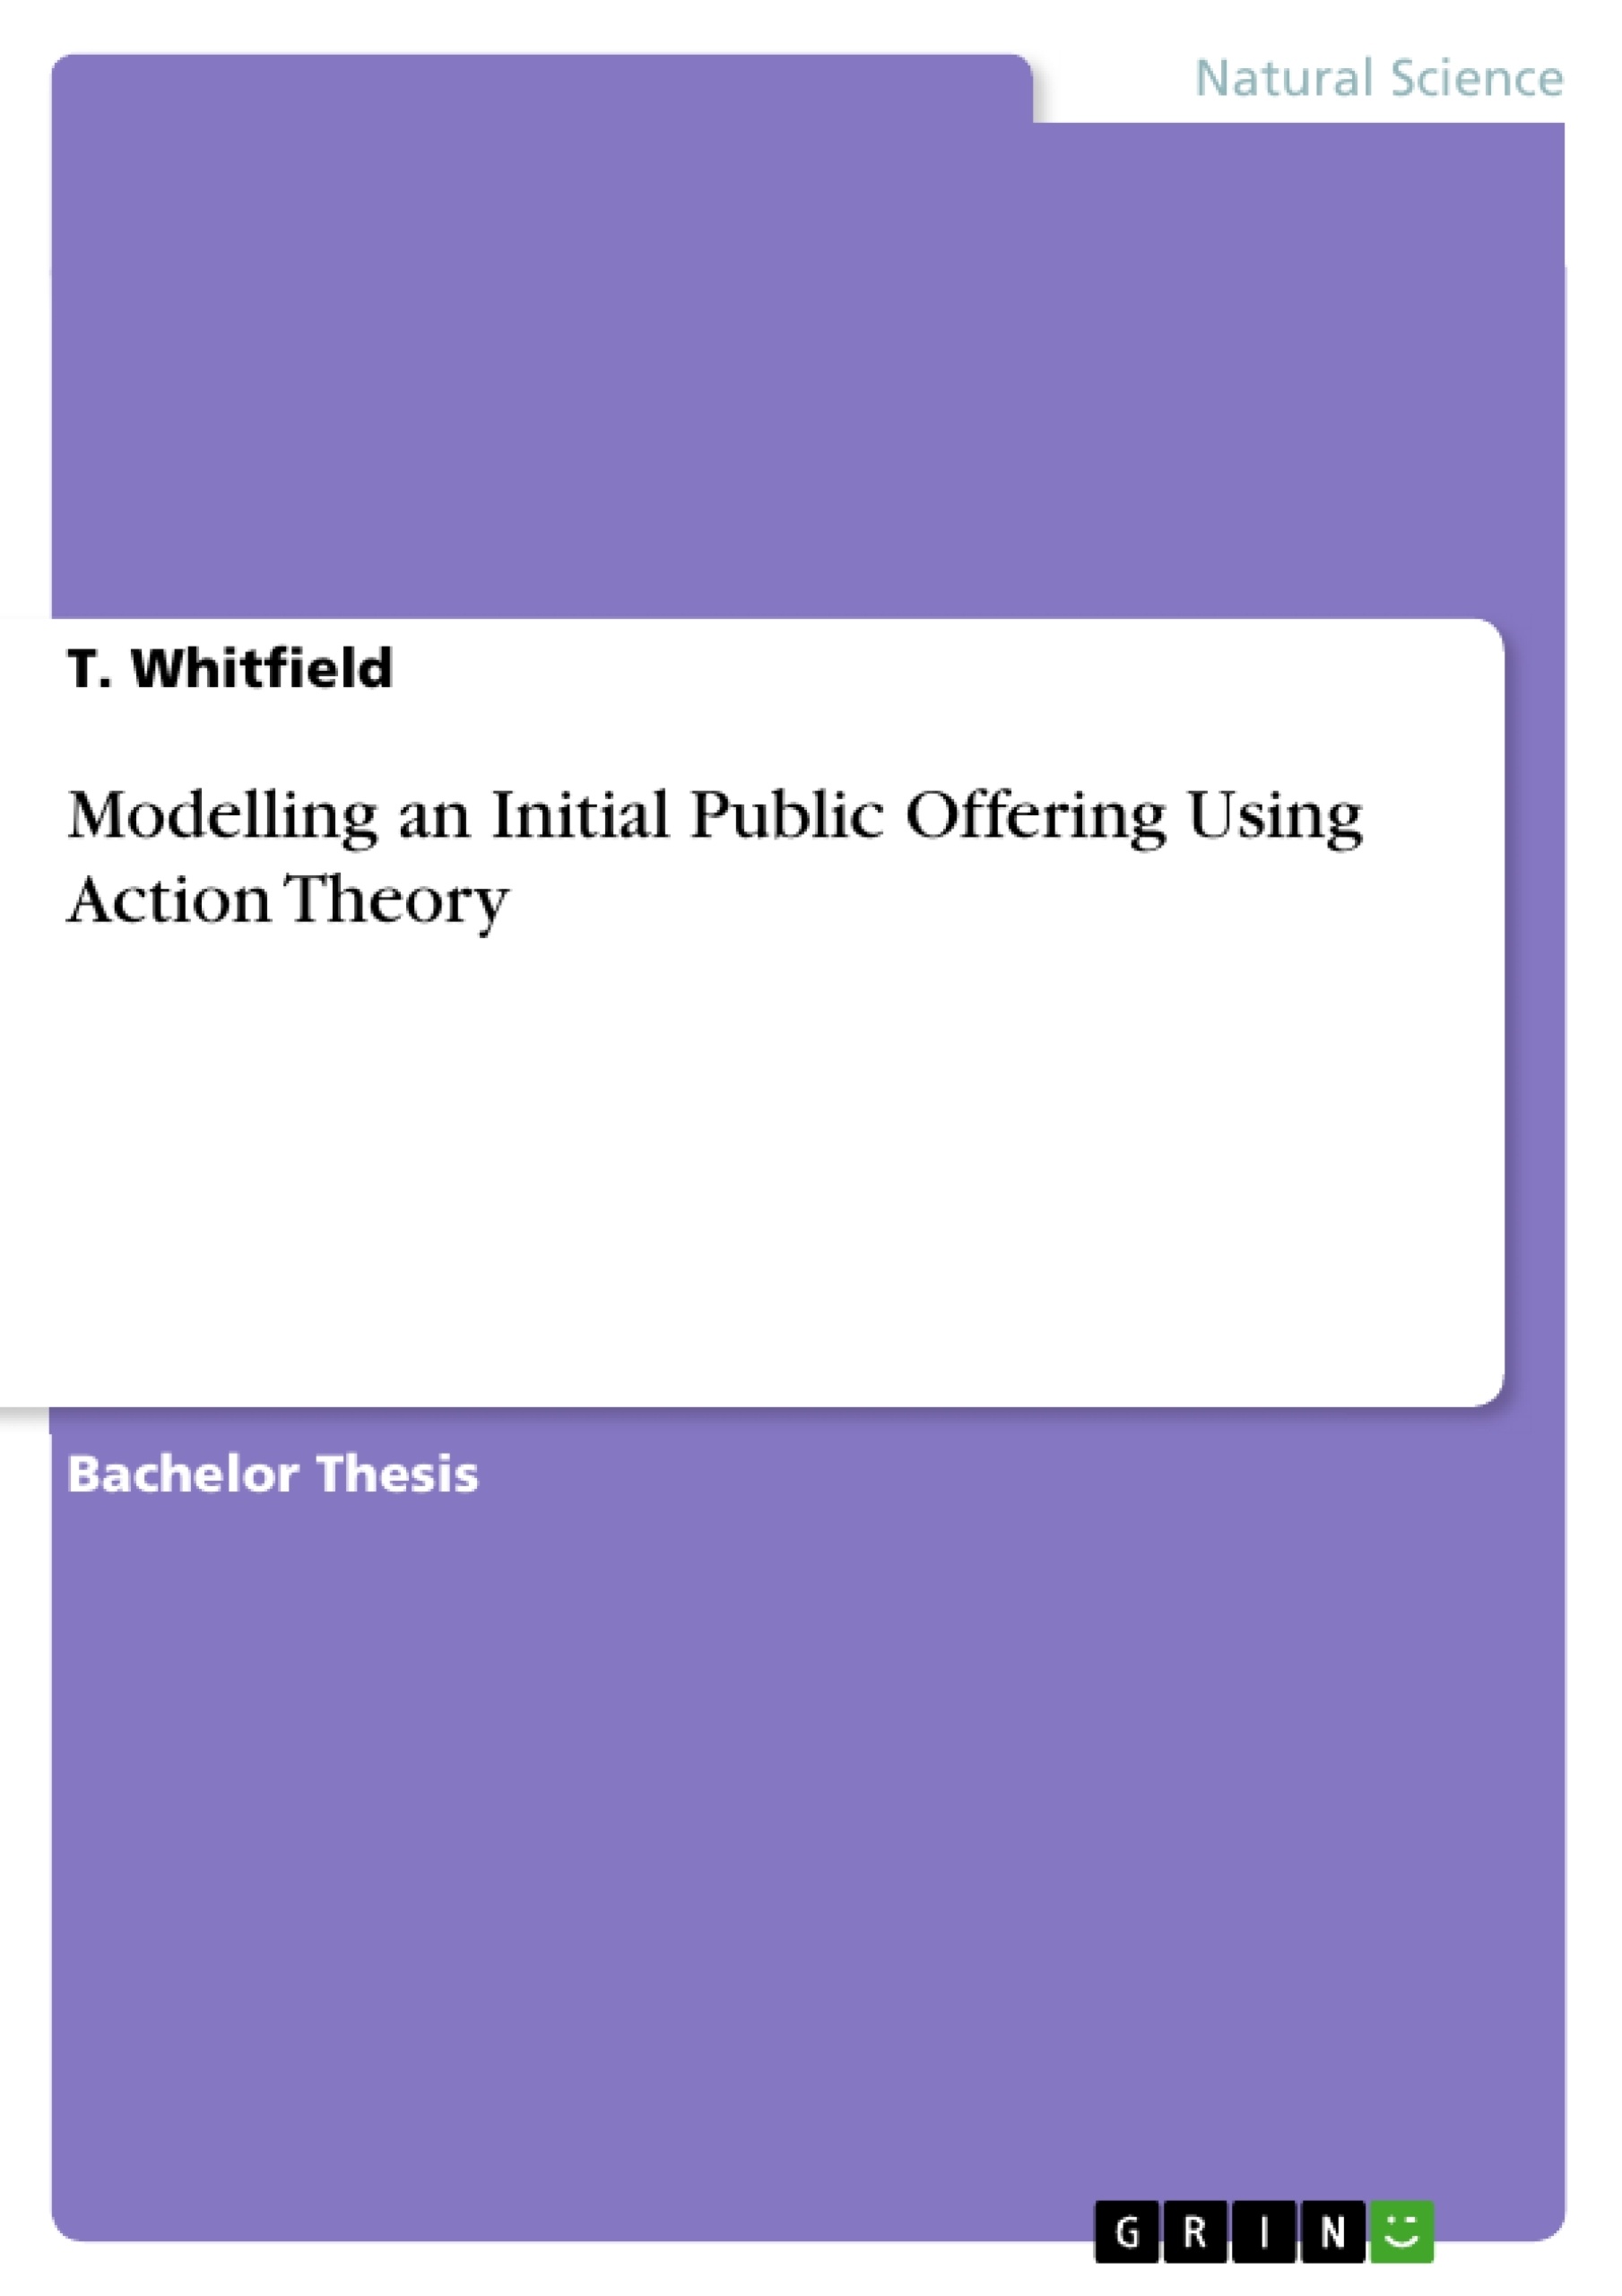 Título: Modelling an Initial Public Offering Using Action Theory